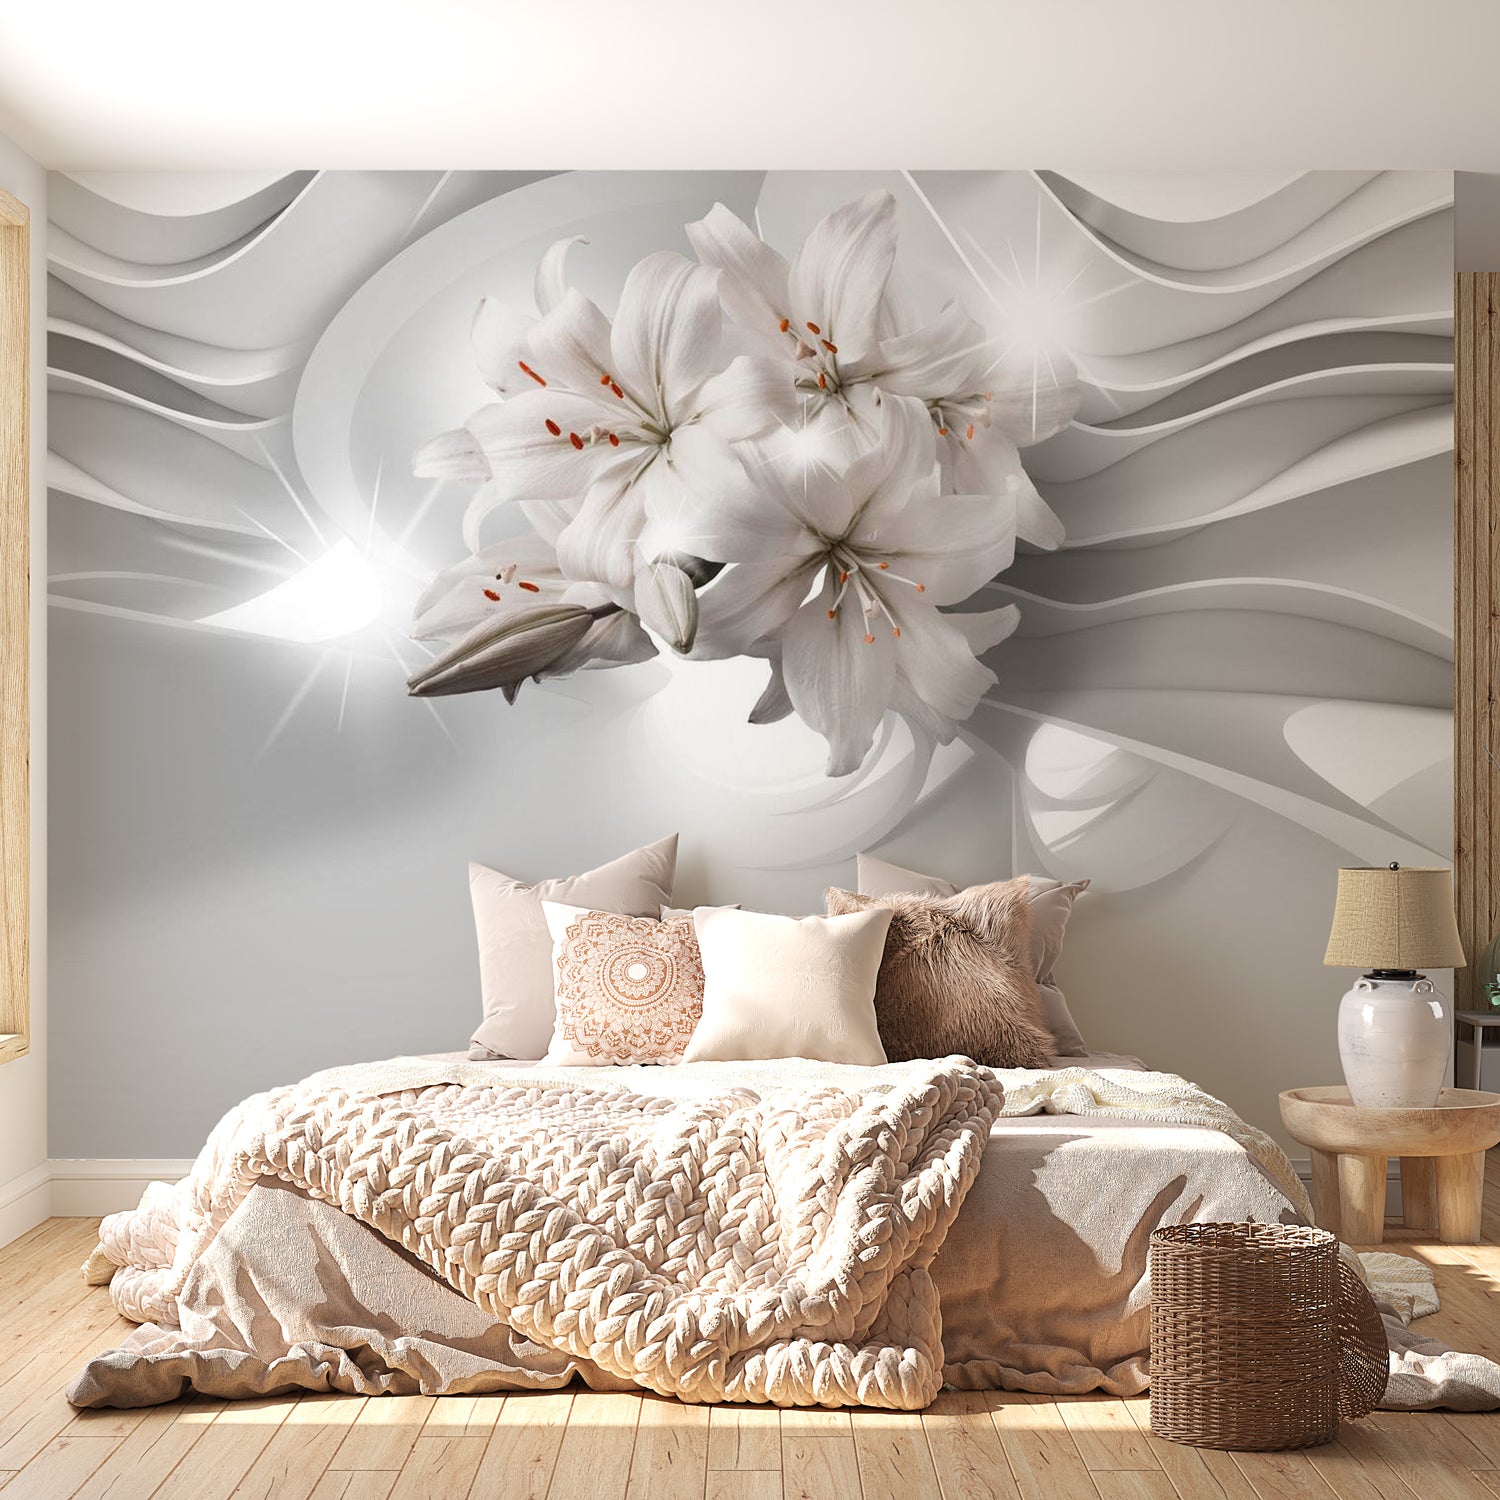 Peel & Stick Floral Wall Mural - Lilies In The Tunnel - Removable Wall Decals